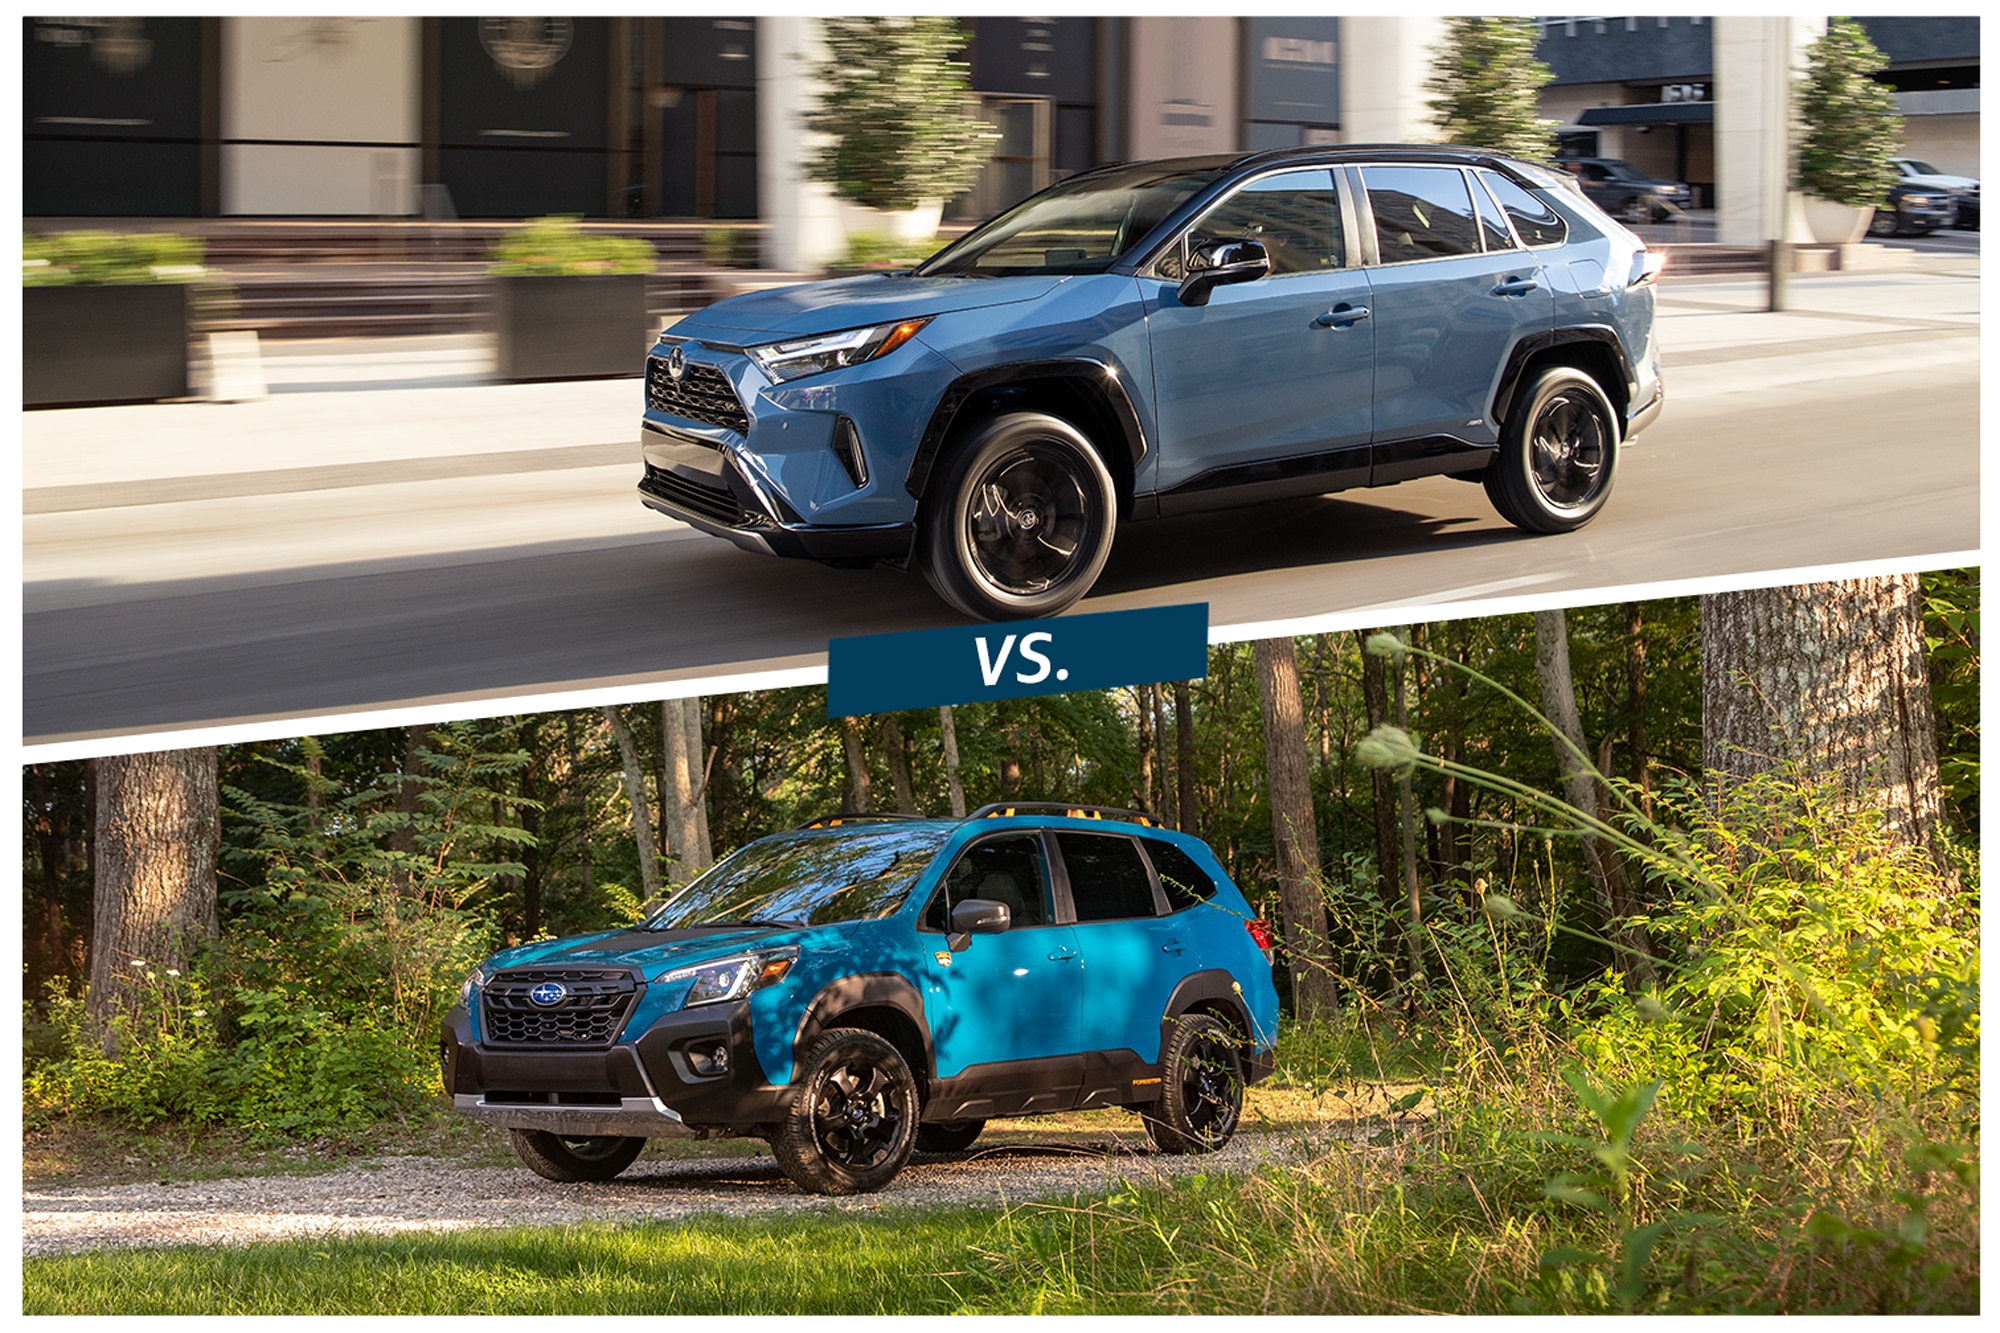 Toyota RAV4 over a Subaru Forester with a versus in between